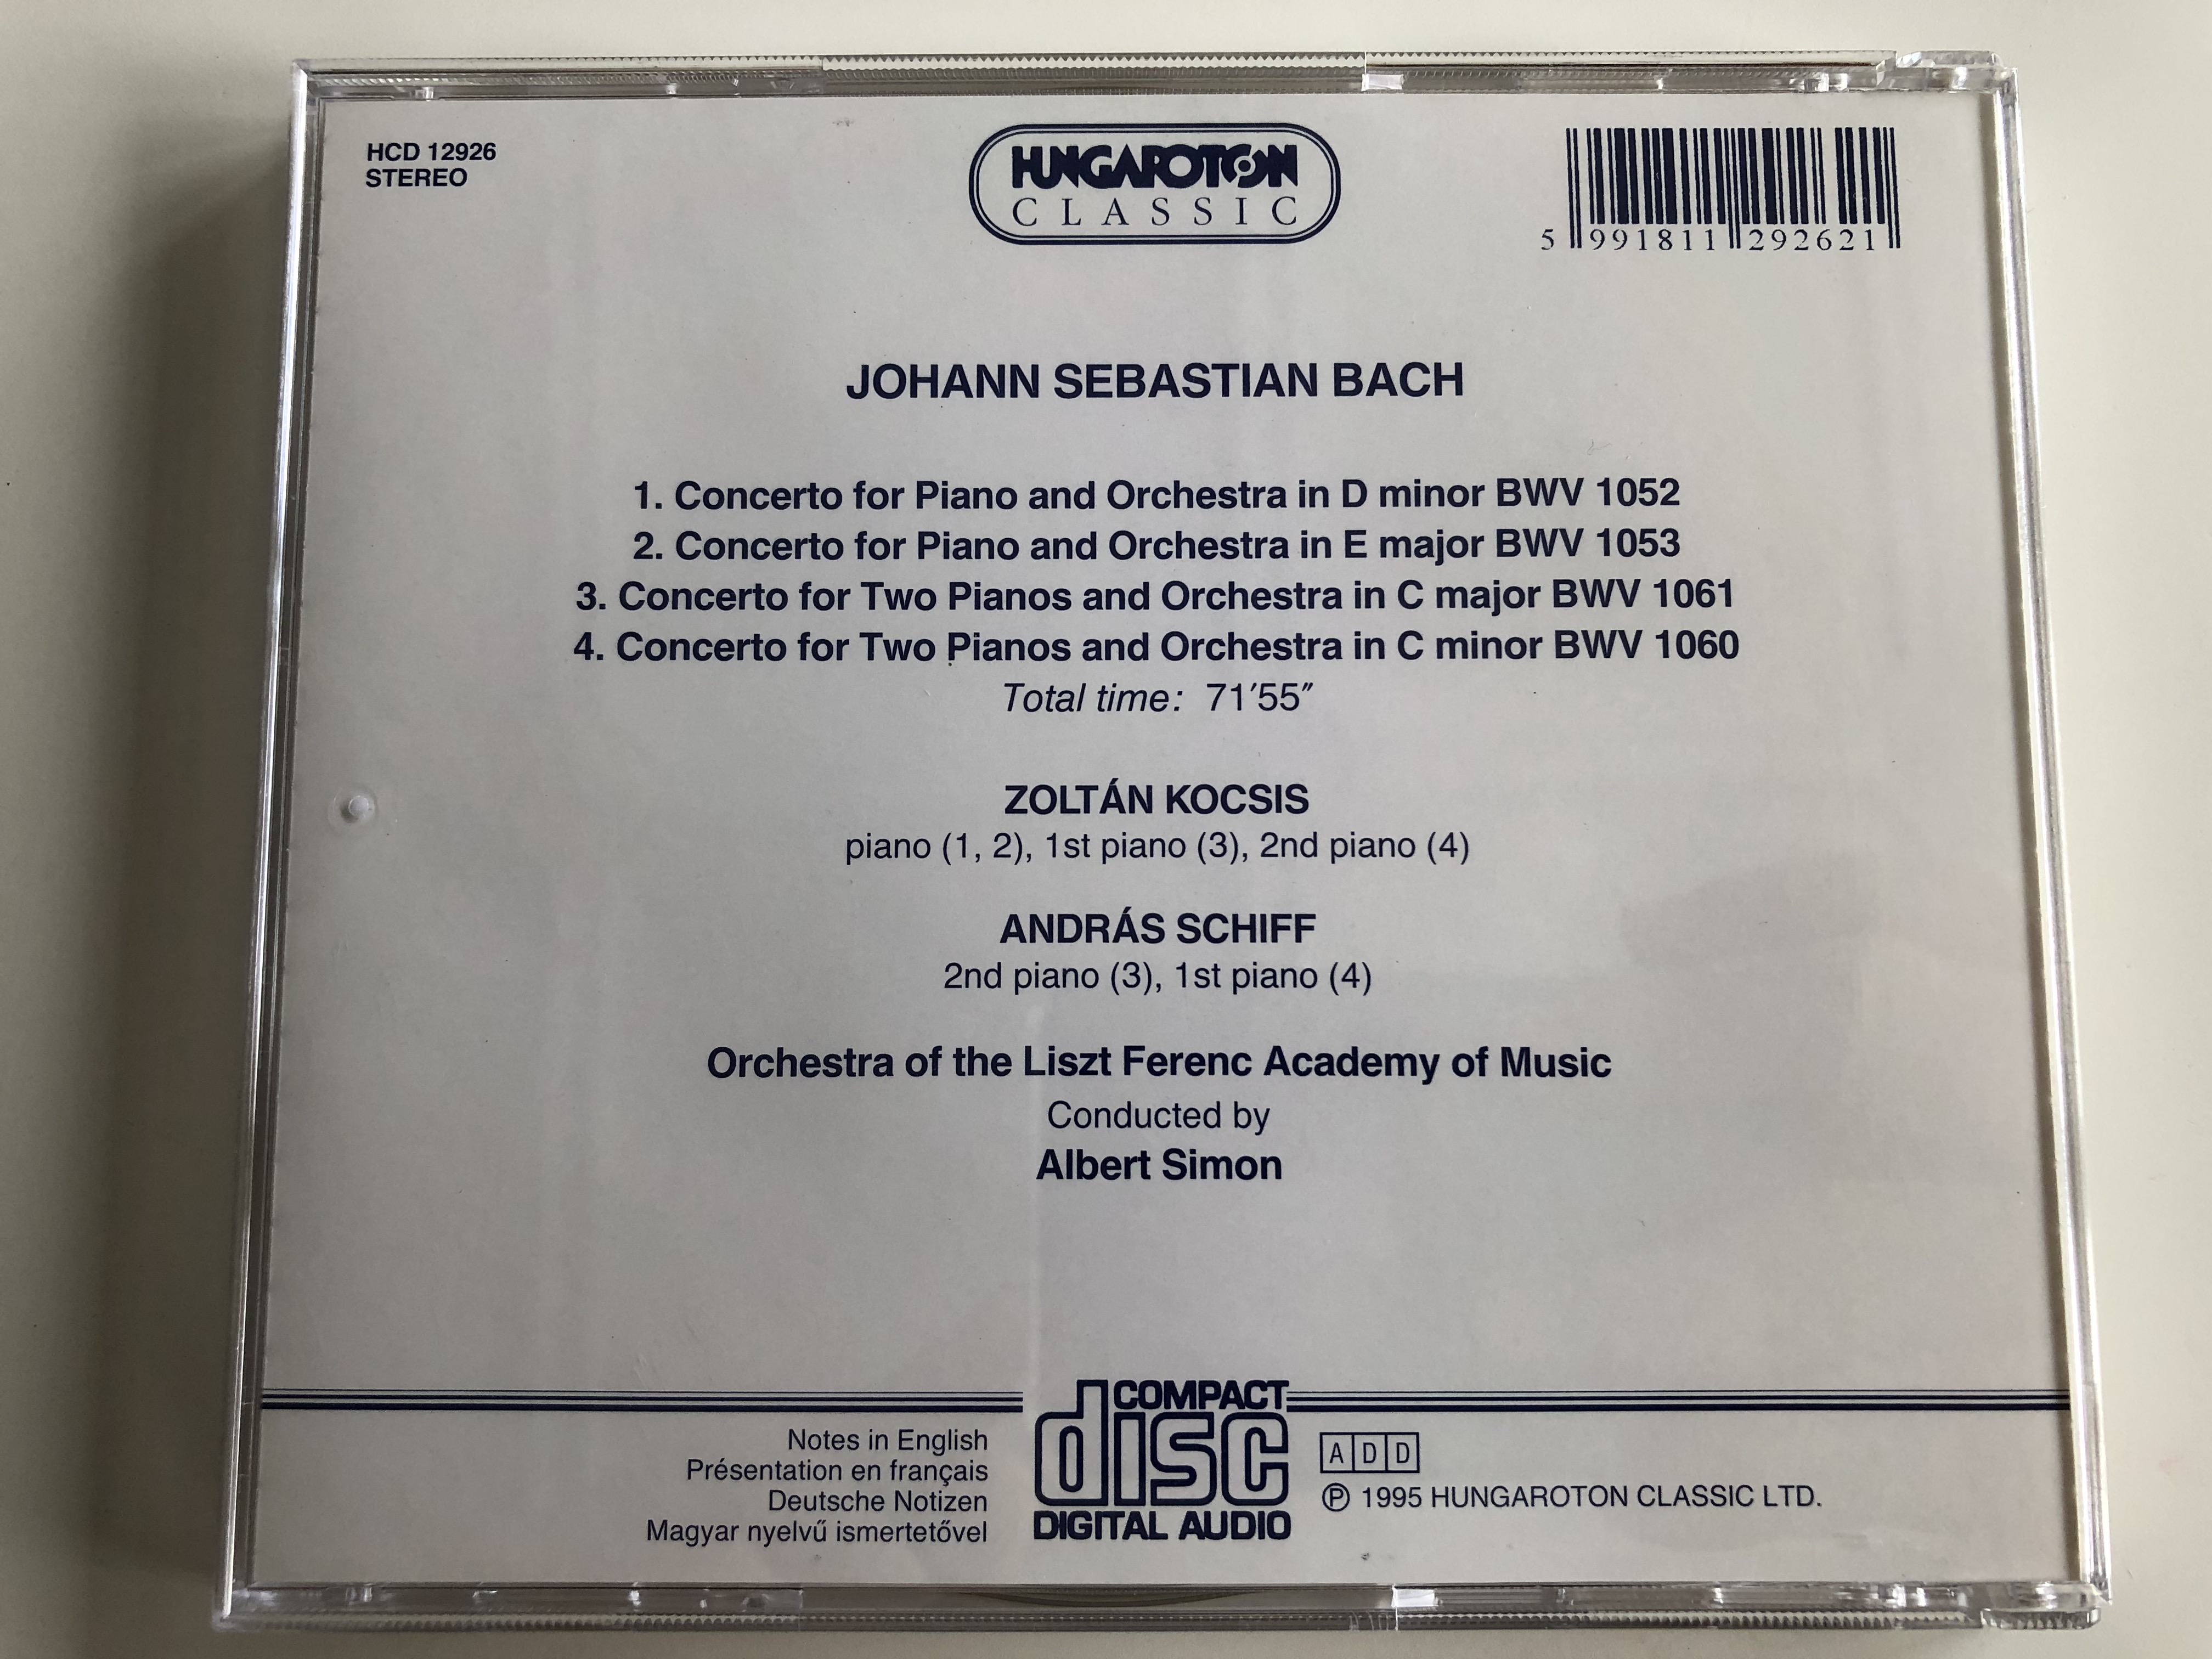 j.-s.-bach-concertos-for-one-and-two-pianos-and-orchestra-zolt-n-kocsis-andr-s-schiff-pianos-orchestra-of-the-liszt-ferenc-academy-of-music-conducted-by-albert-simon-hungaroton-classic-8-.jpg